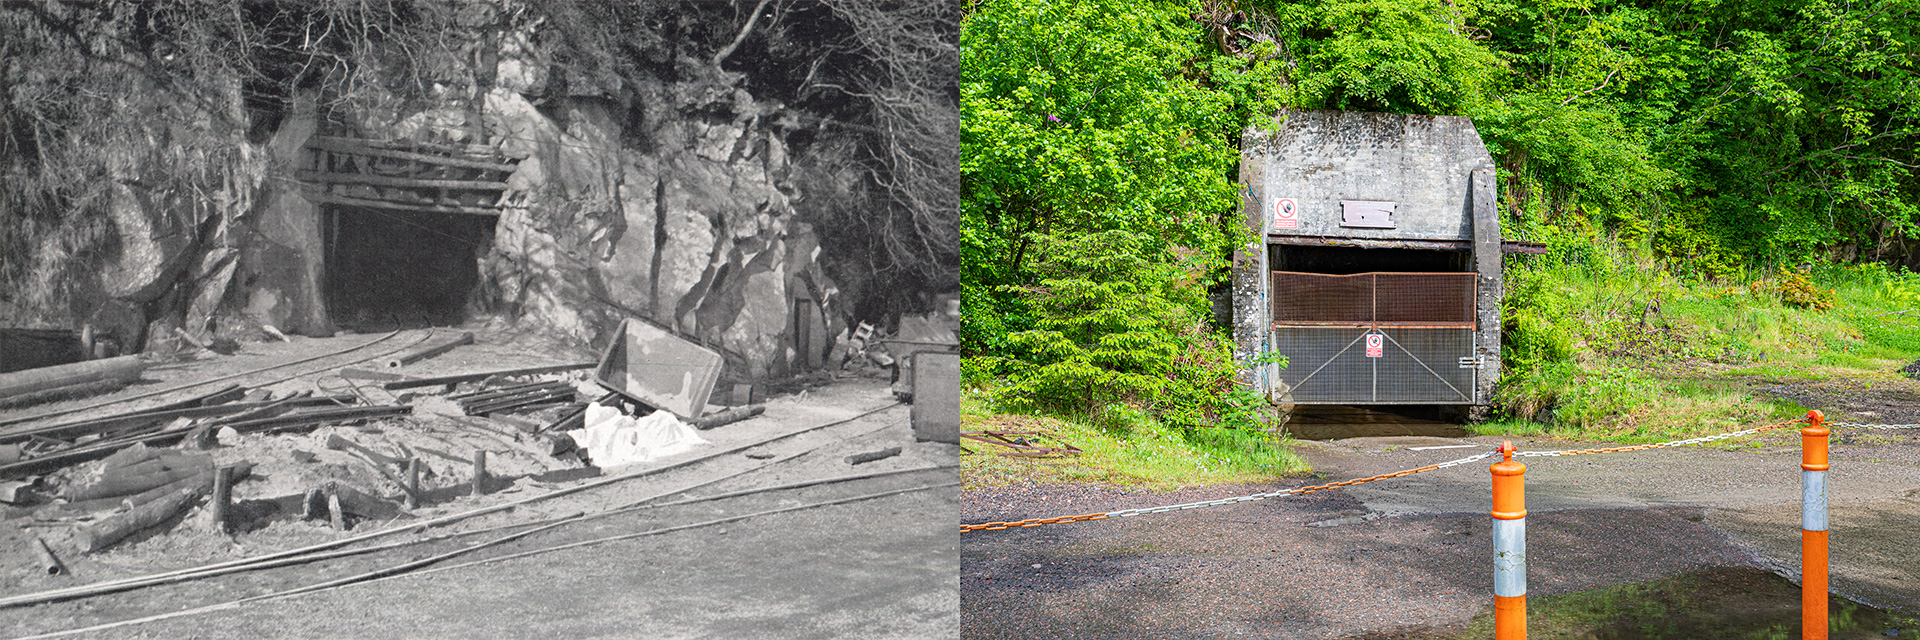 Lochaline | Entrance to the sand mine at Loch Aline - Then and now